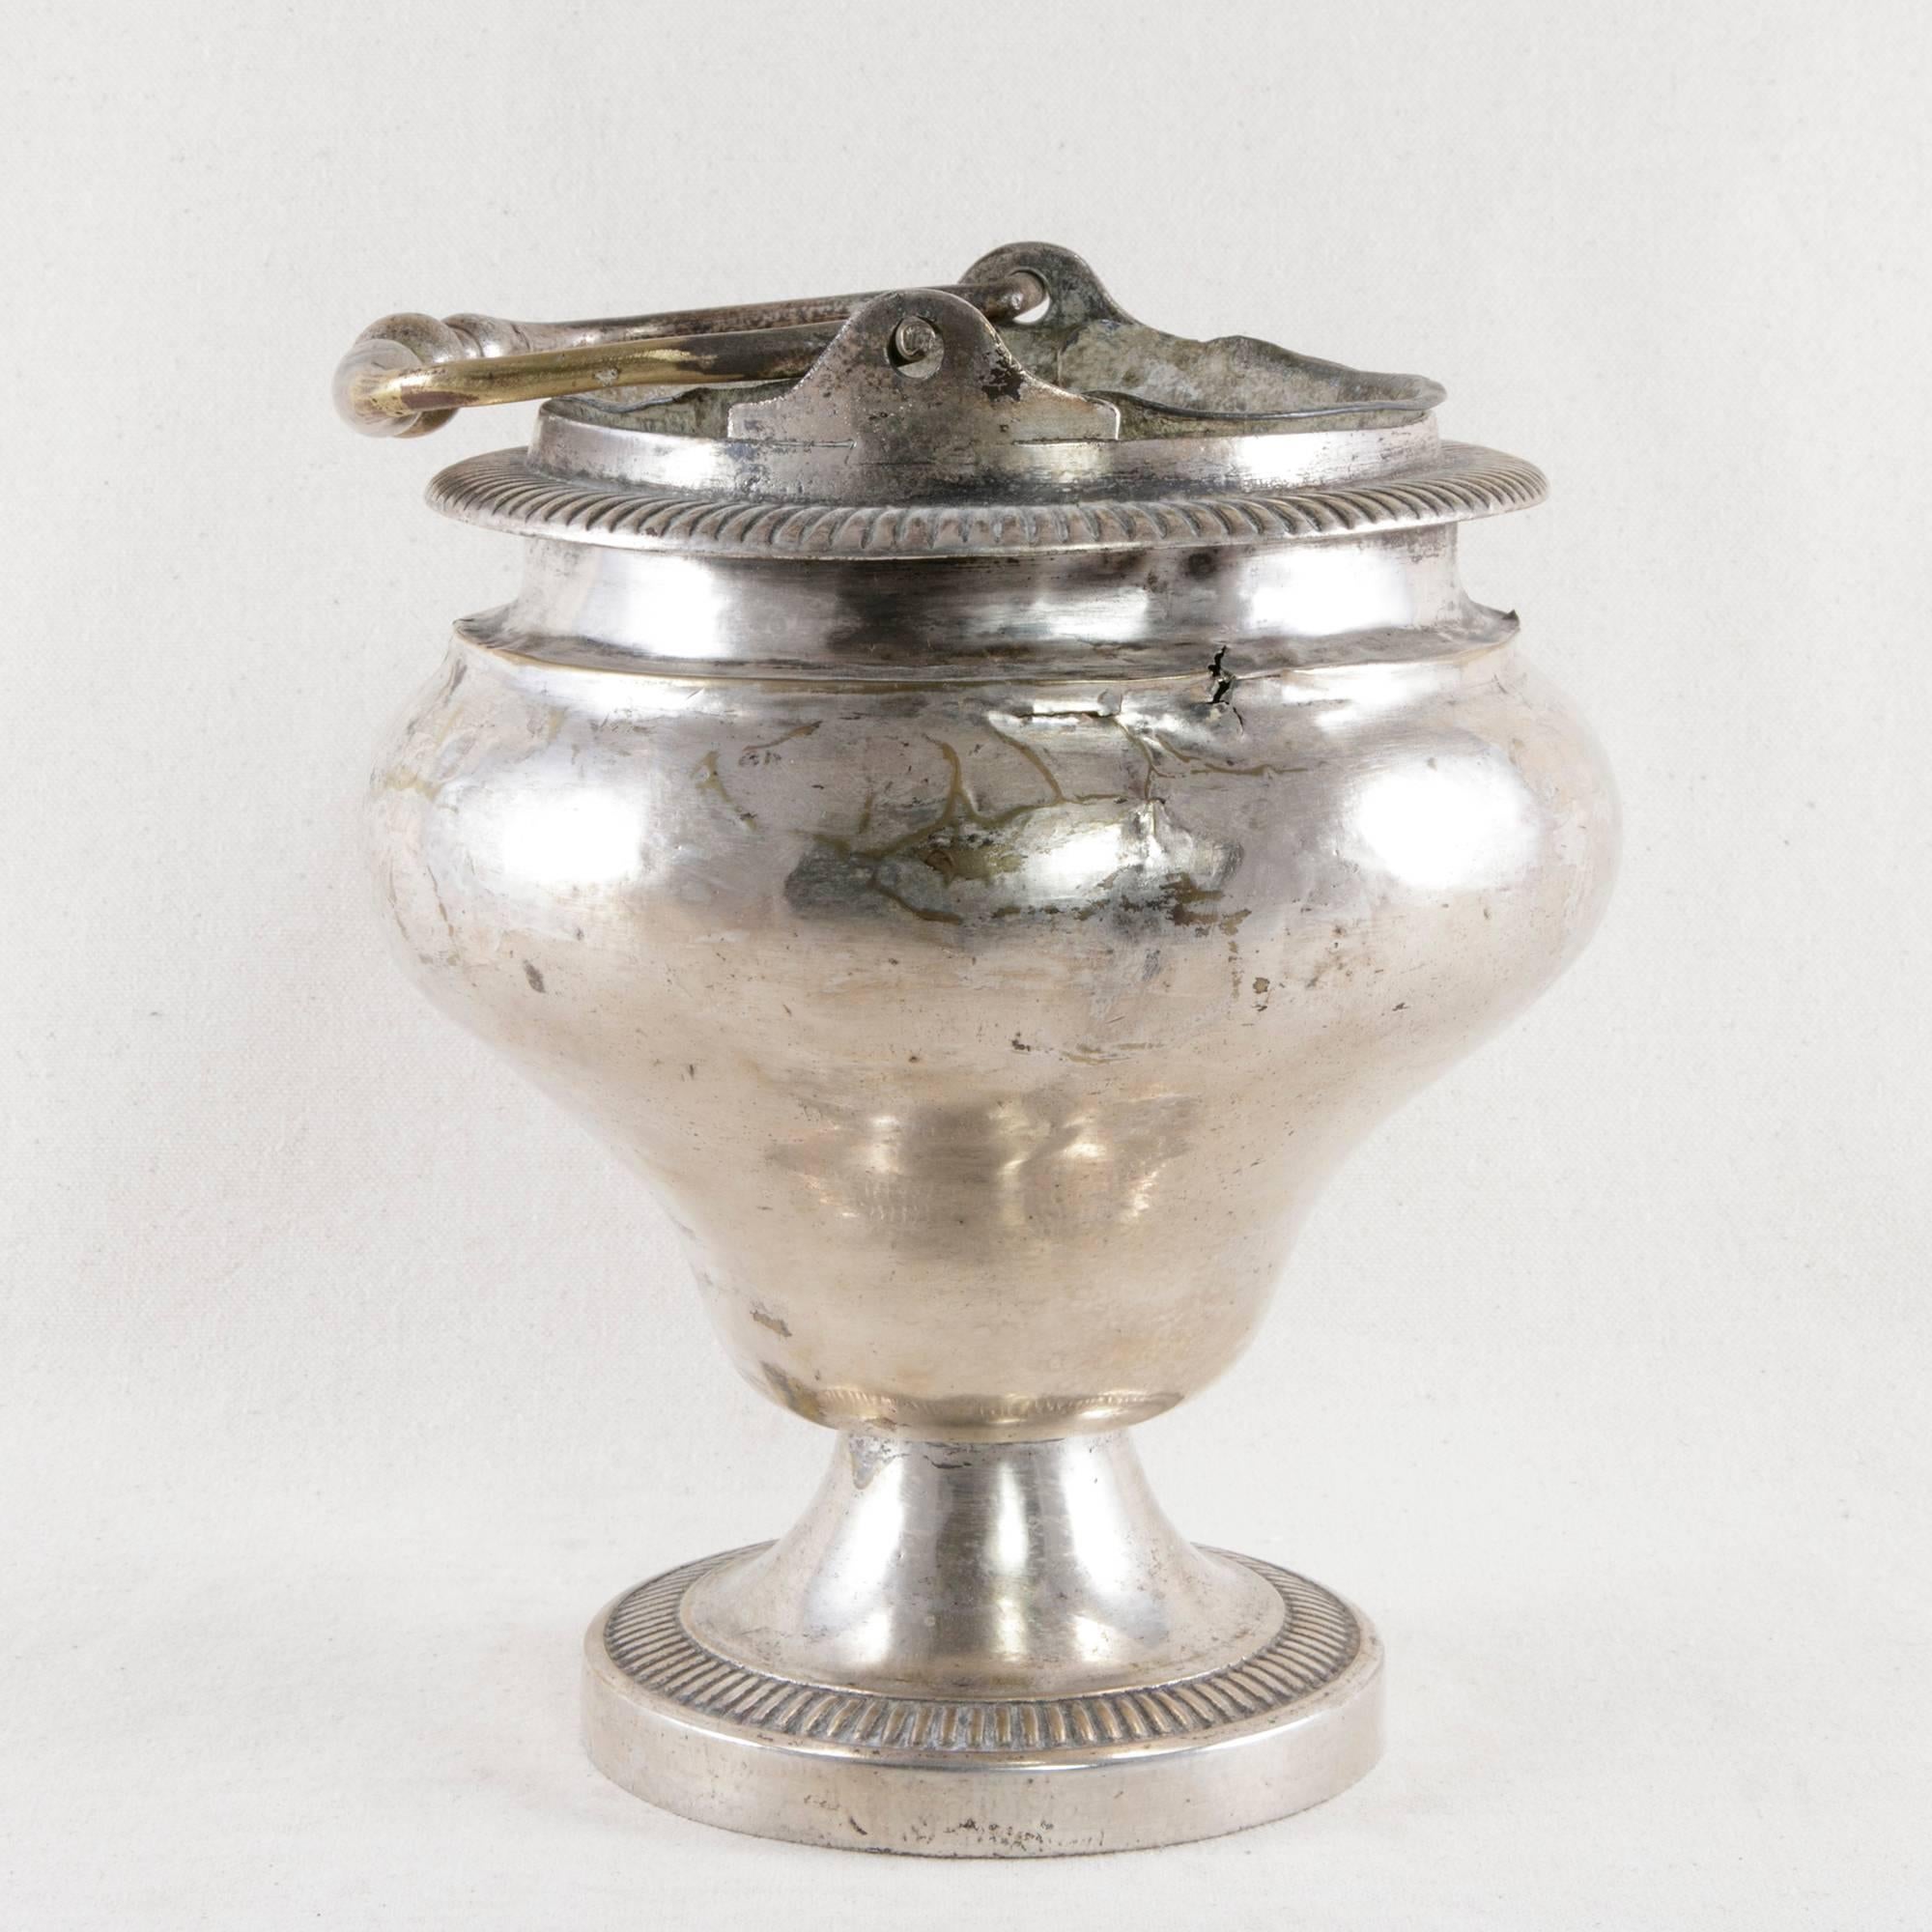 This 18th century French silver plate holy water vessel with handle has its original zinc liner. It was originally used in a church by the priest who walked down the central aisle to bless the congregation by sprinkling holy water over them, circa